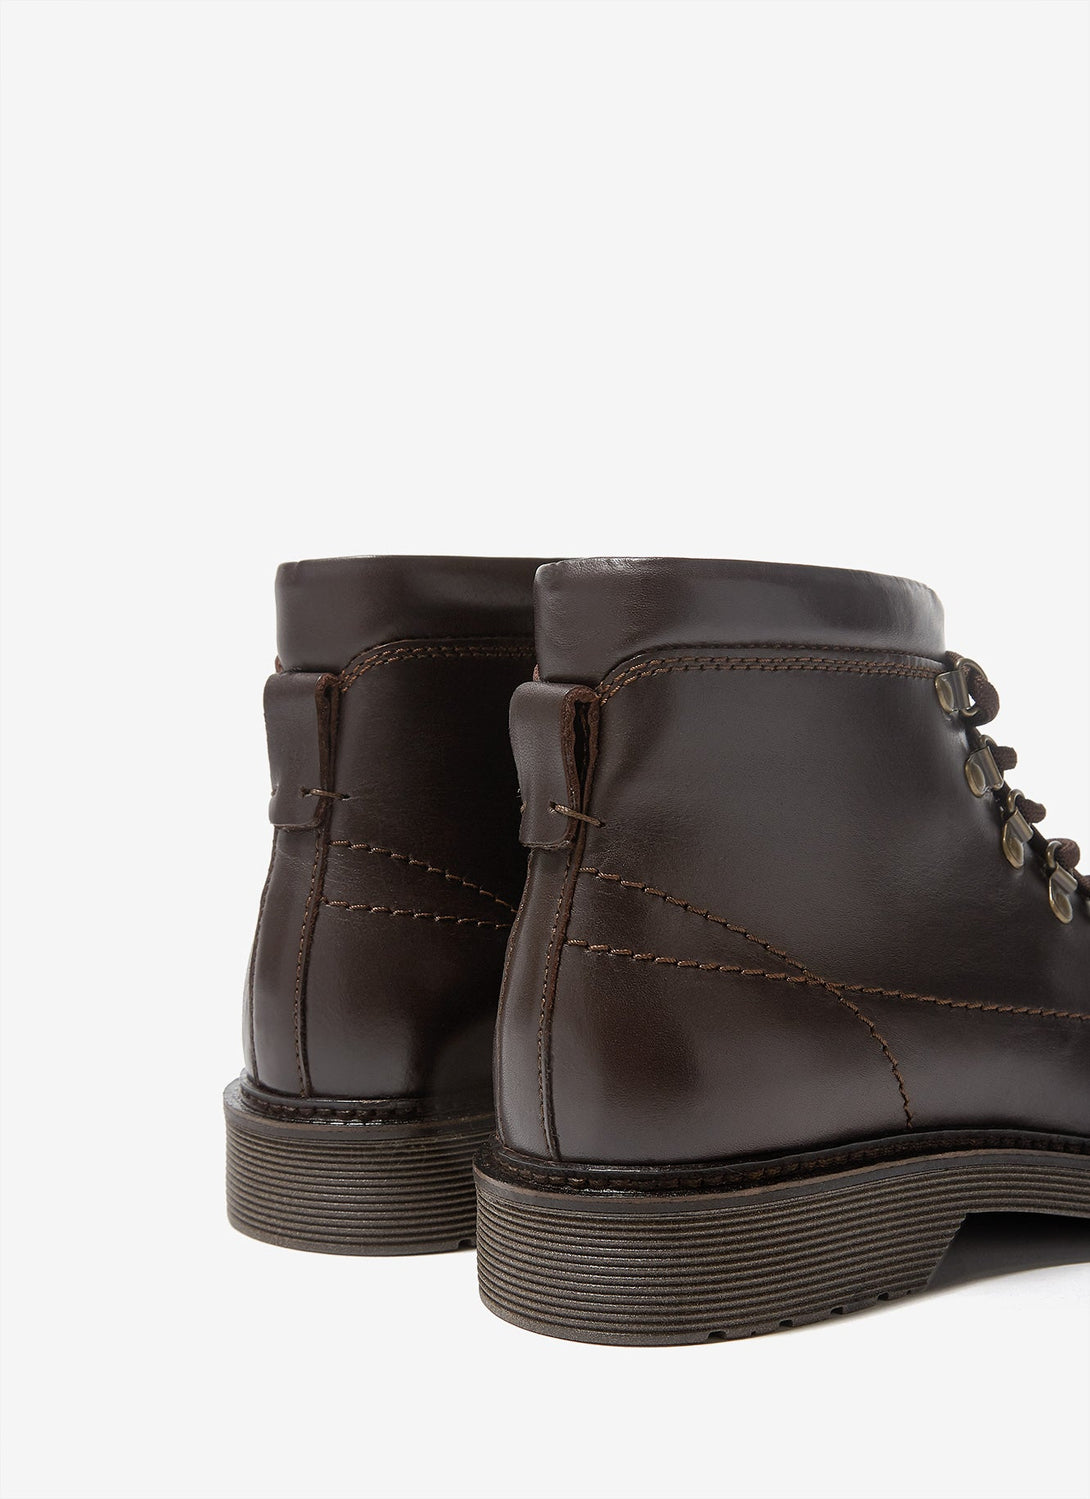 Men Shoes | Brown Leather Military Ankle Boots by Spanish designer Adolfo Dominguez